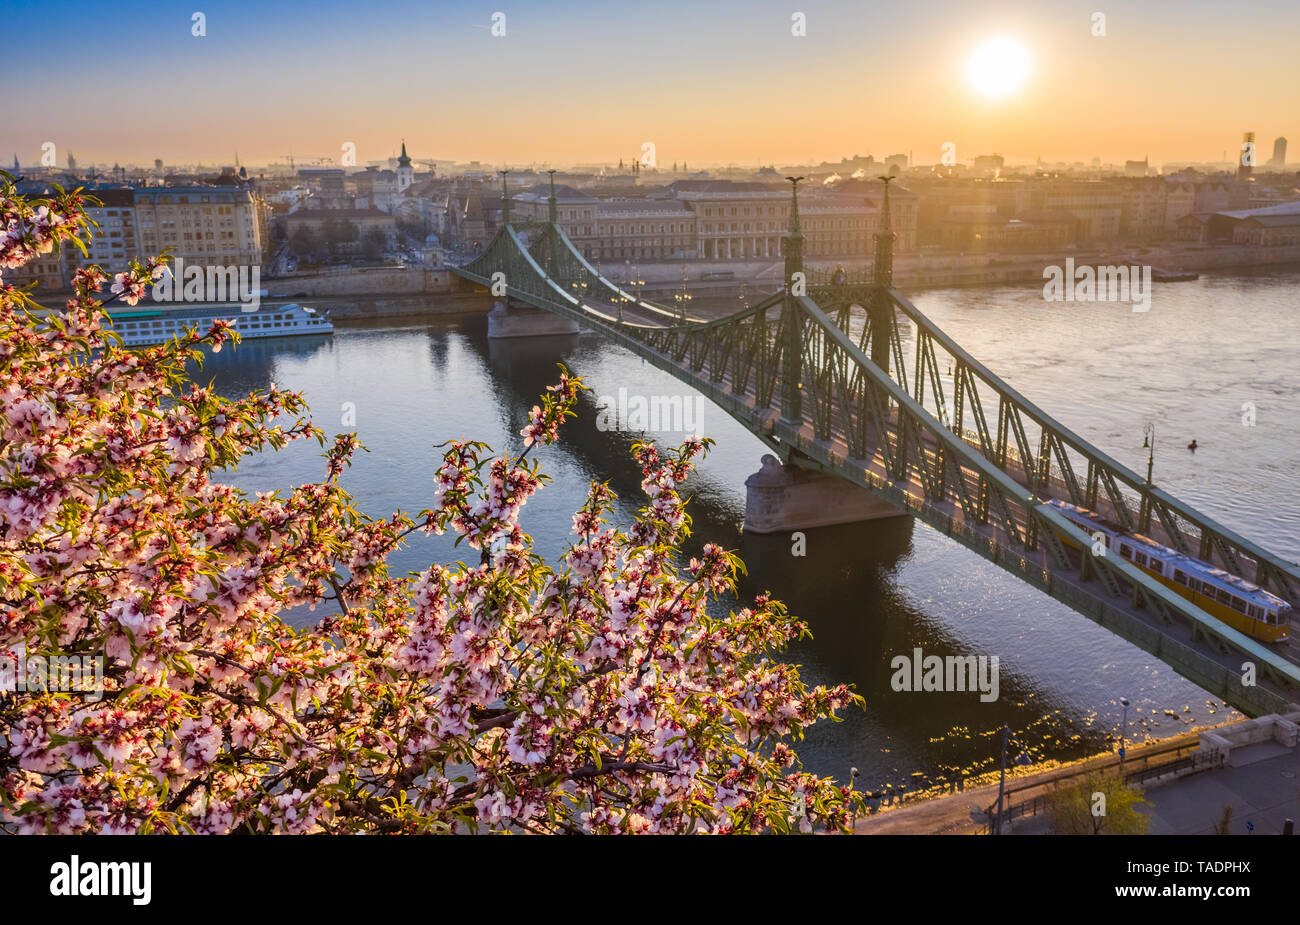 Budapest, Hungary - Beautiful Cherry Blossom at sunrise with Liberty Bridge and traditional tram at background on a sunny morning. Spring has arrived  Stock Photo